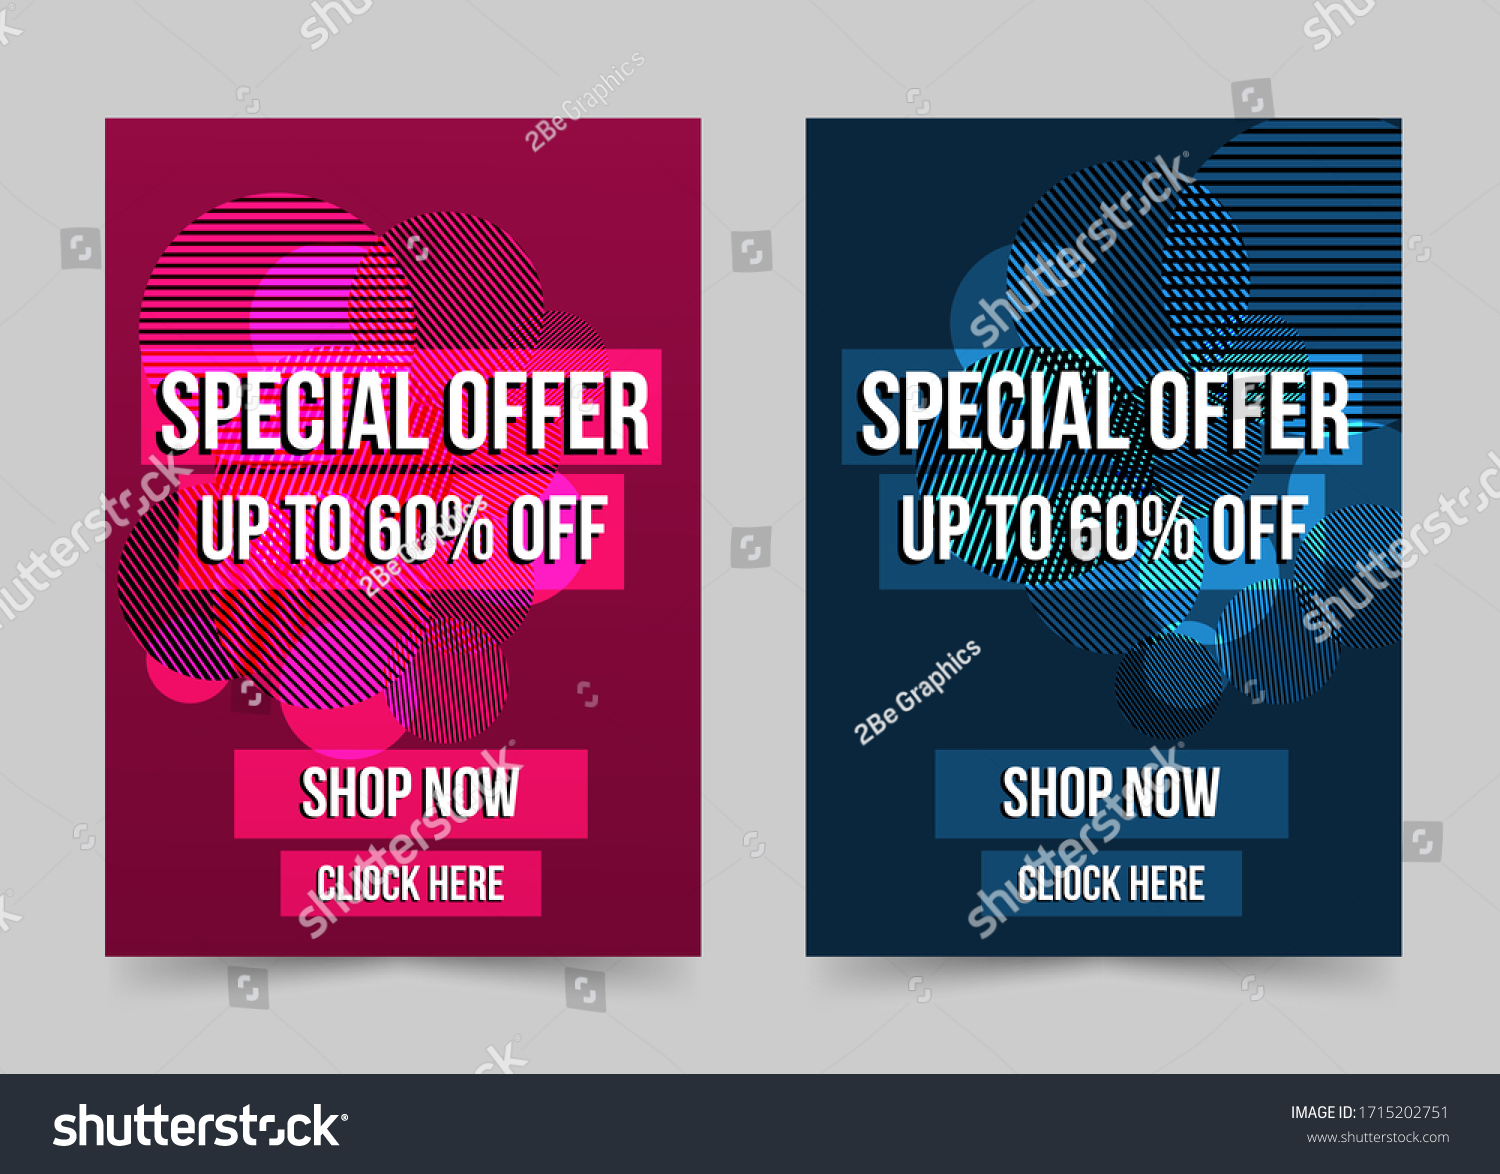 Special Offer Banner Set Modern Geometric Stock Vector (Royalty Free ...